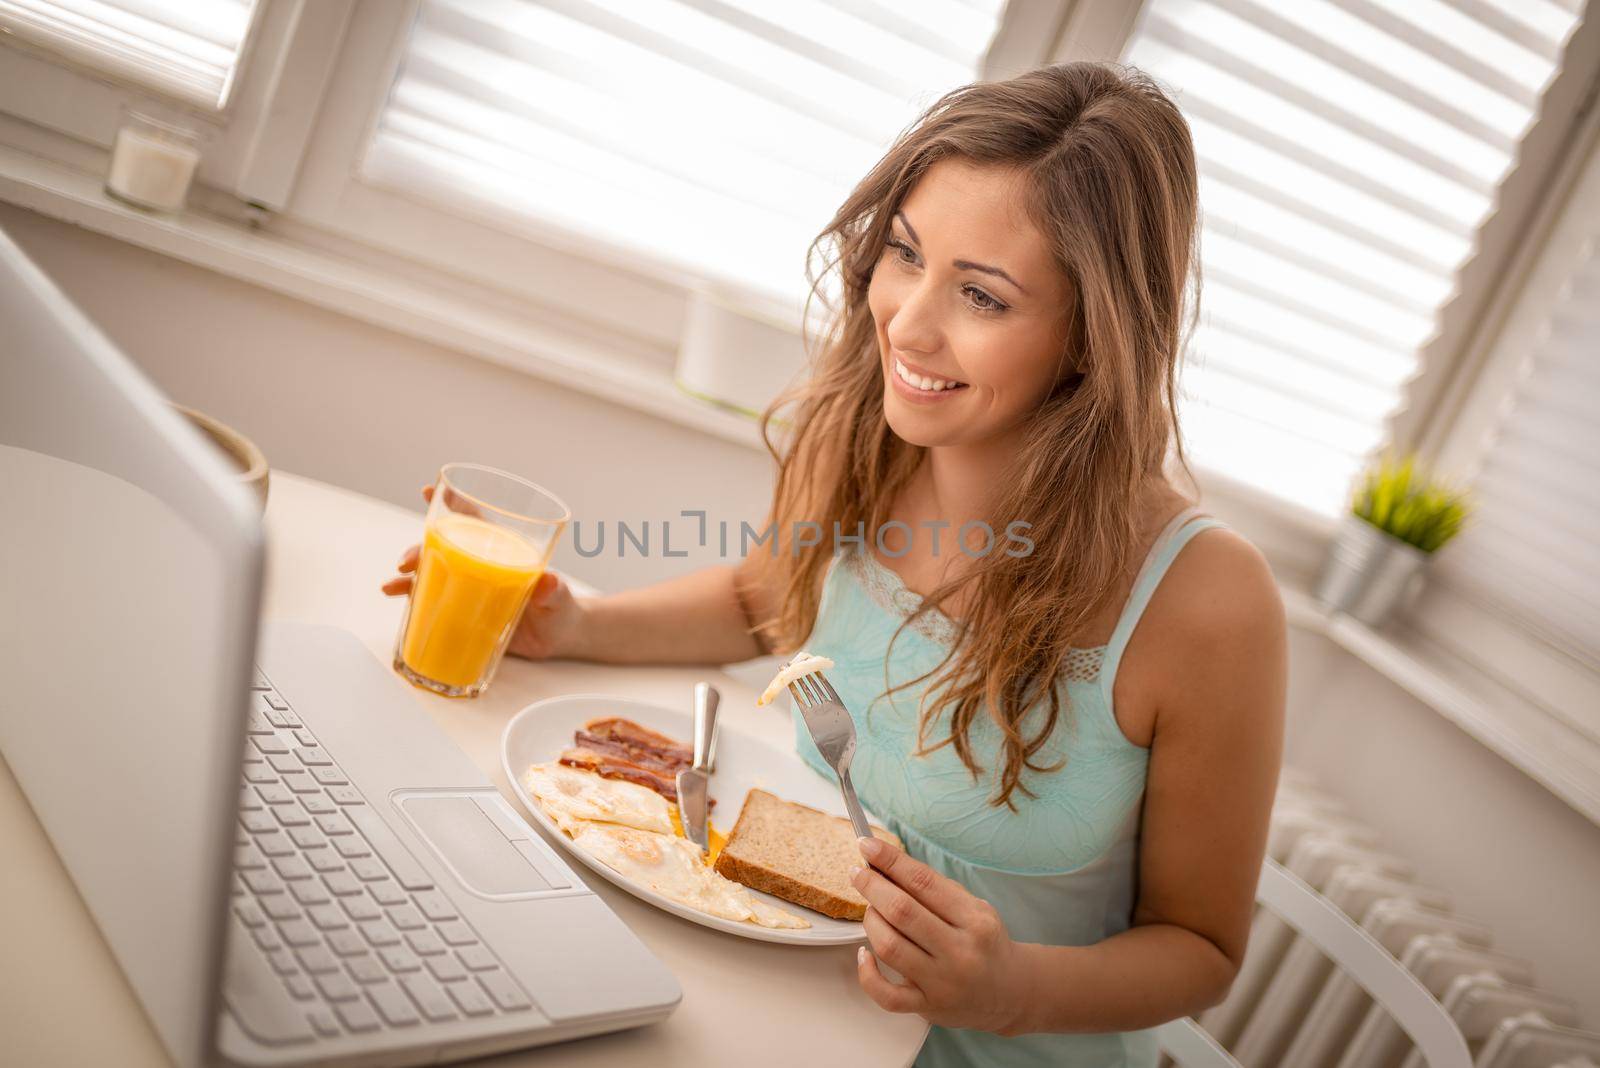 Young beautiful smiling woman having a breakfast at home and surfing social media at the laptop. On the plate there are bacon, eggs and slices of bread.